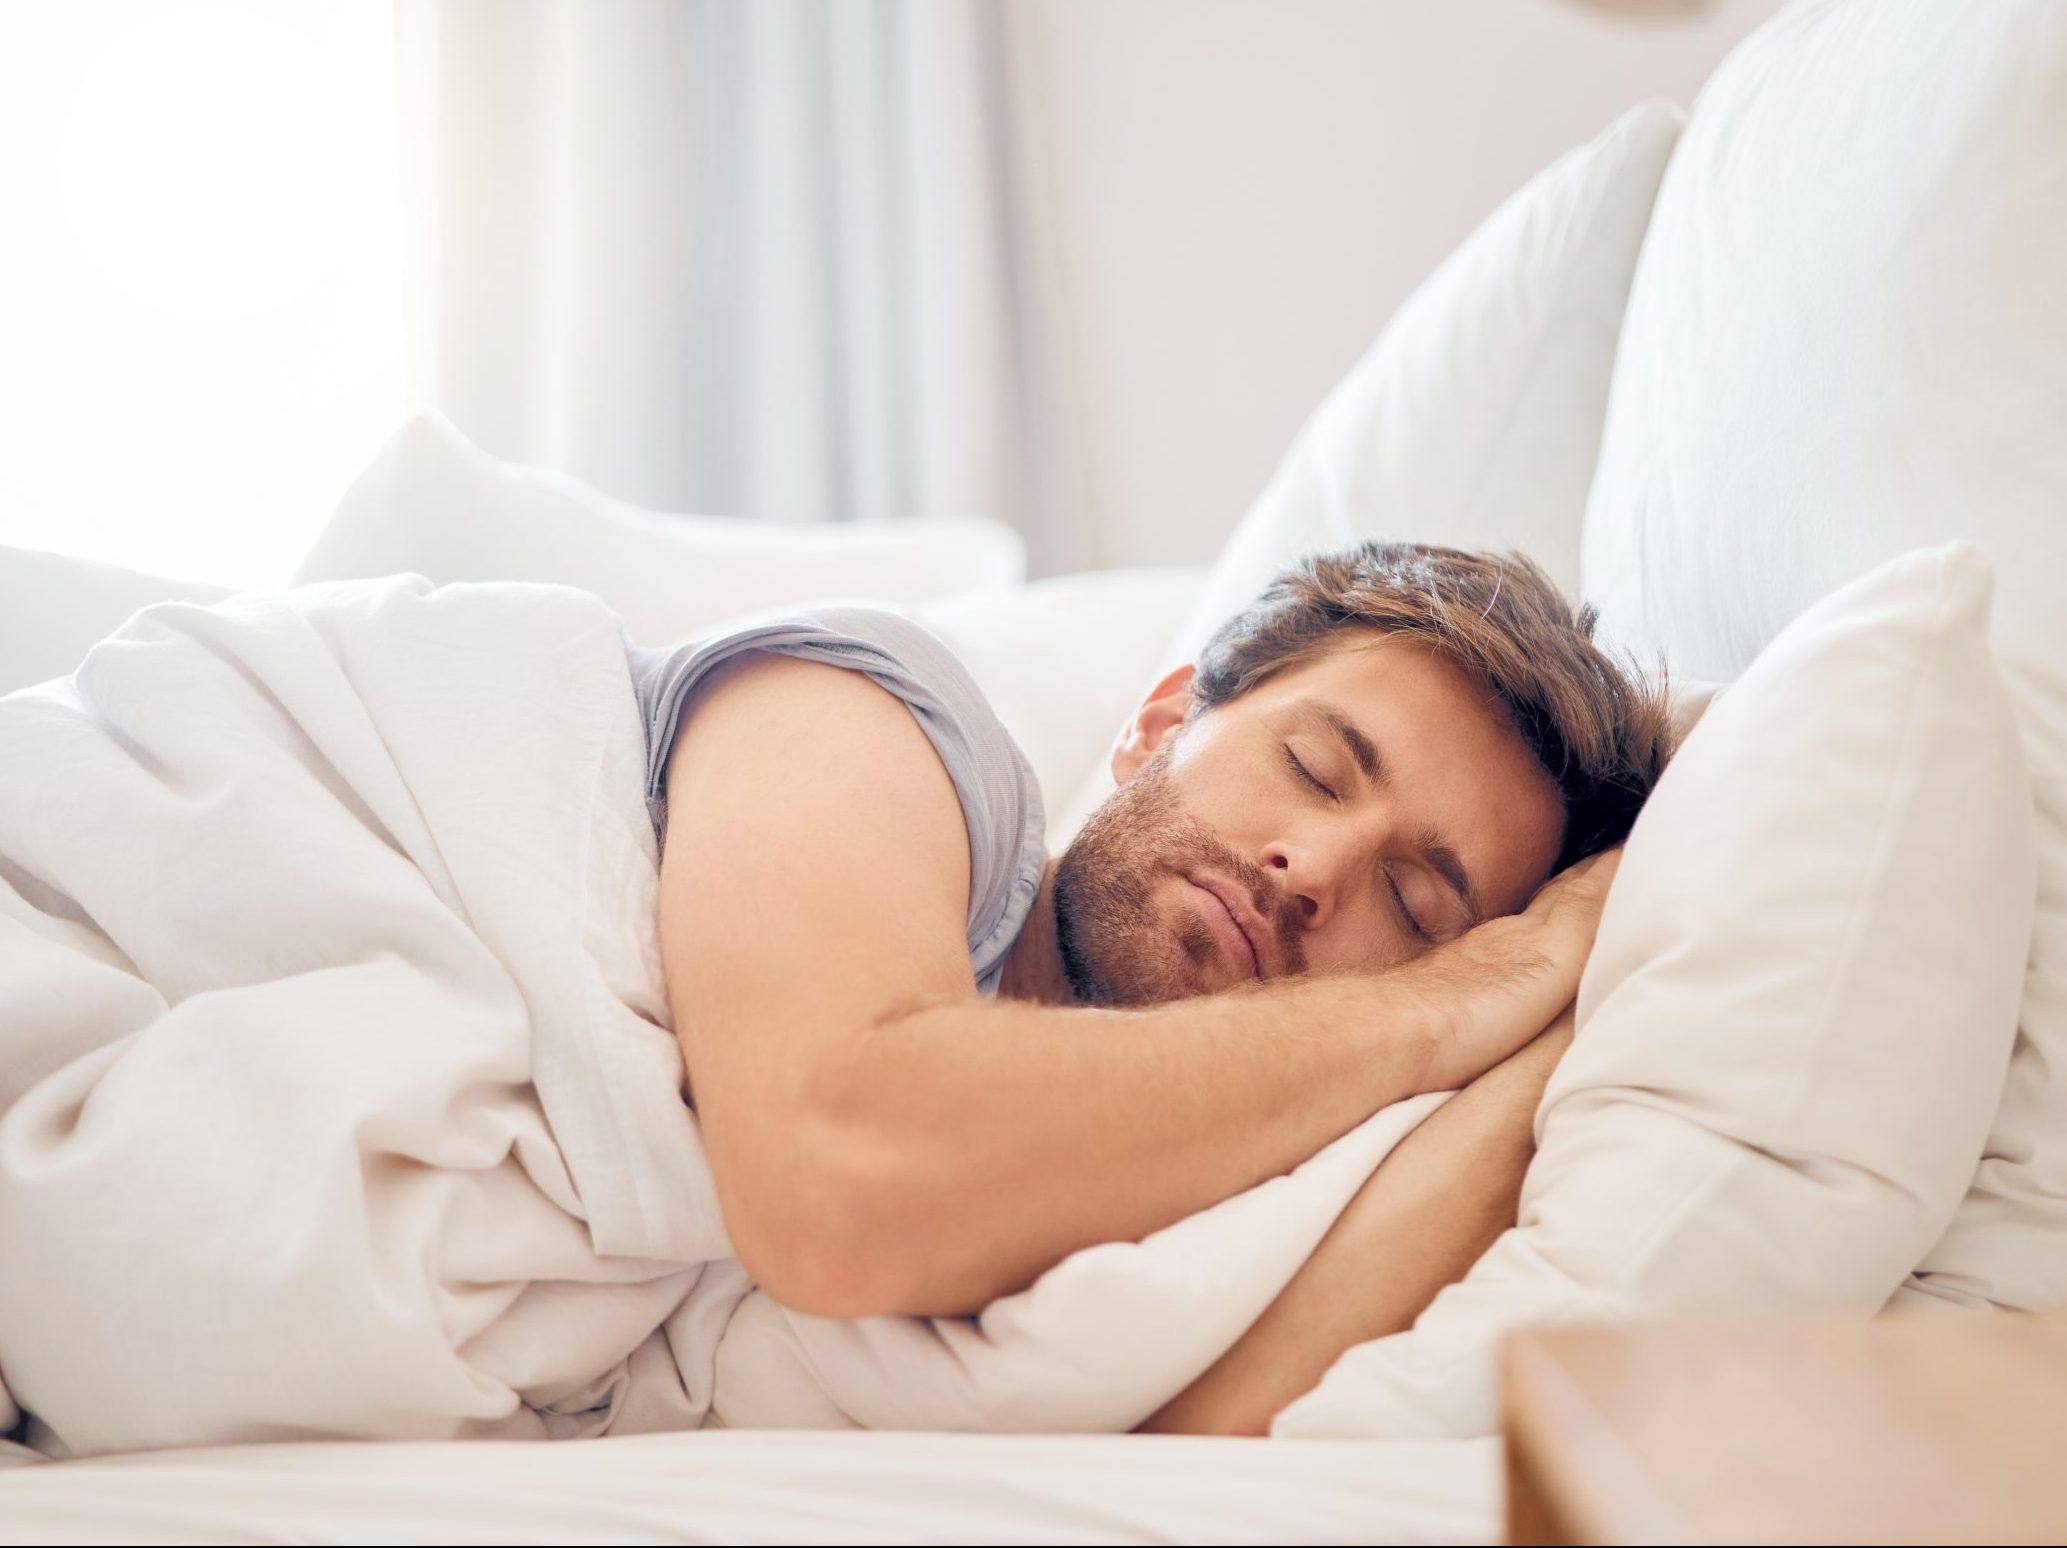 Sleeping longer during the weekend could help keep heart attacks